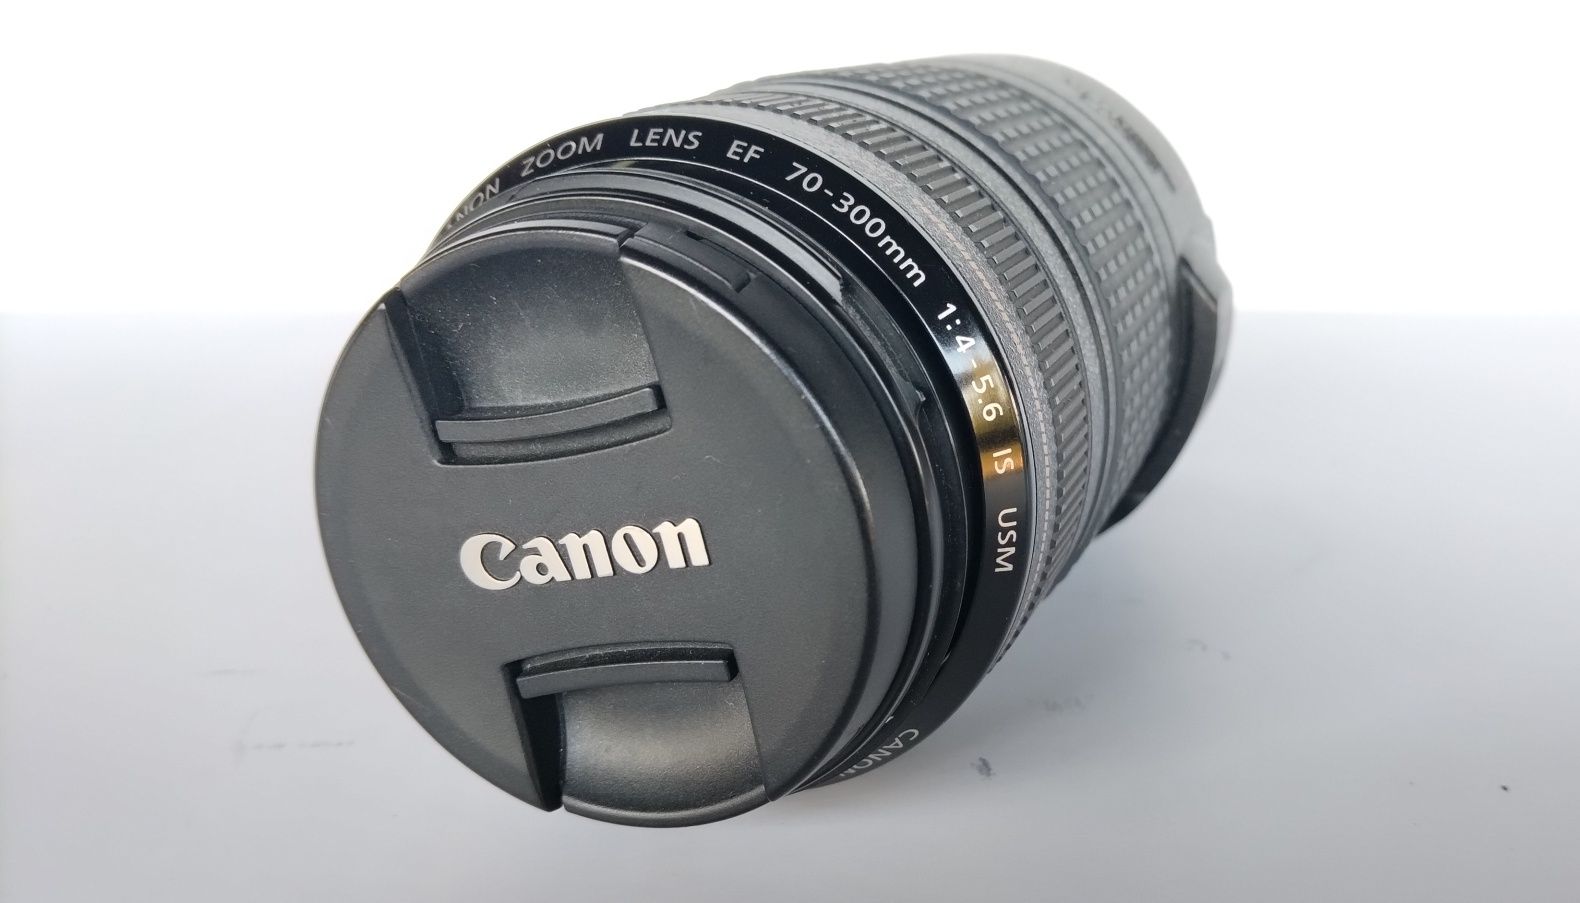 Objectiva Zoom Canon EF 70-300mm F4-5.6 IS USM.